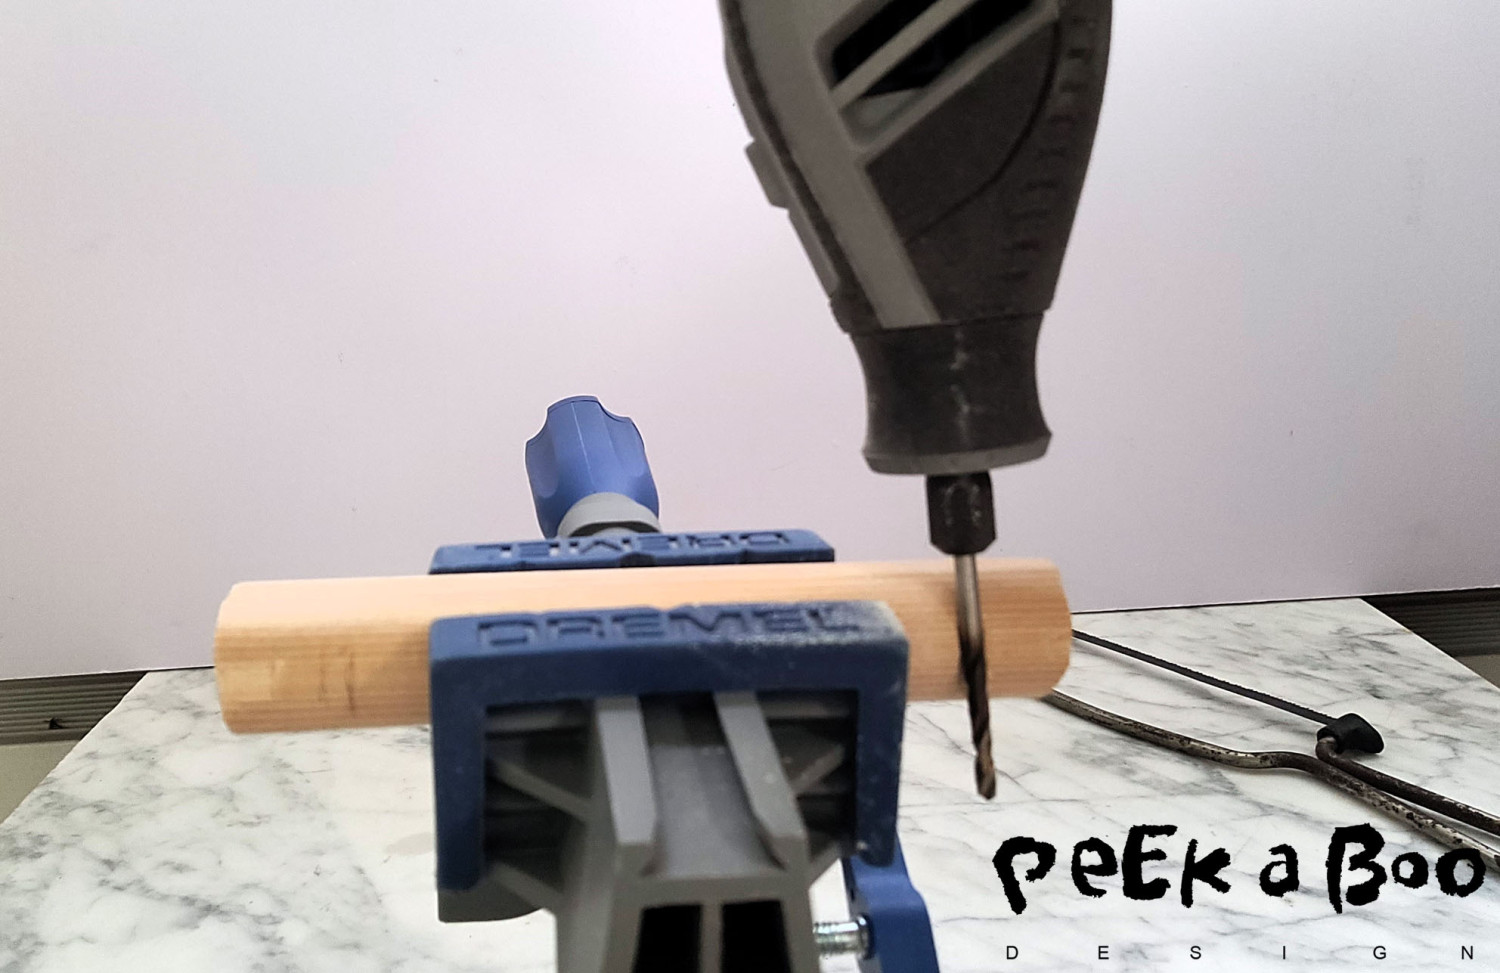 Place the wooden stik in your vise and drill half through to make the grooves..